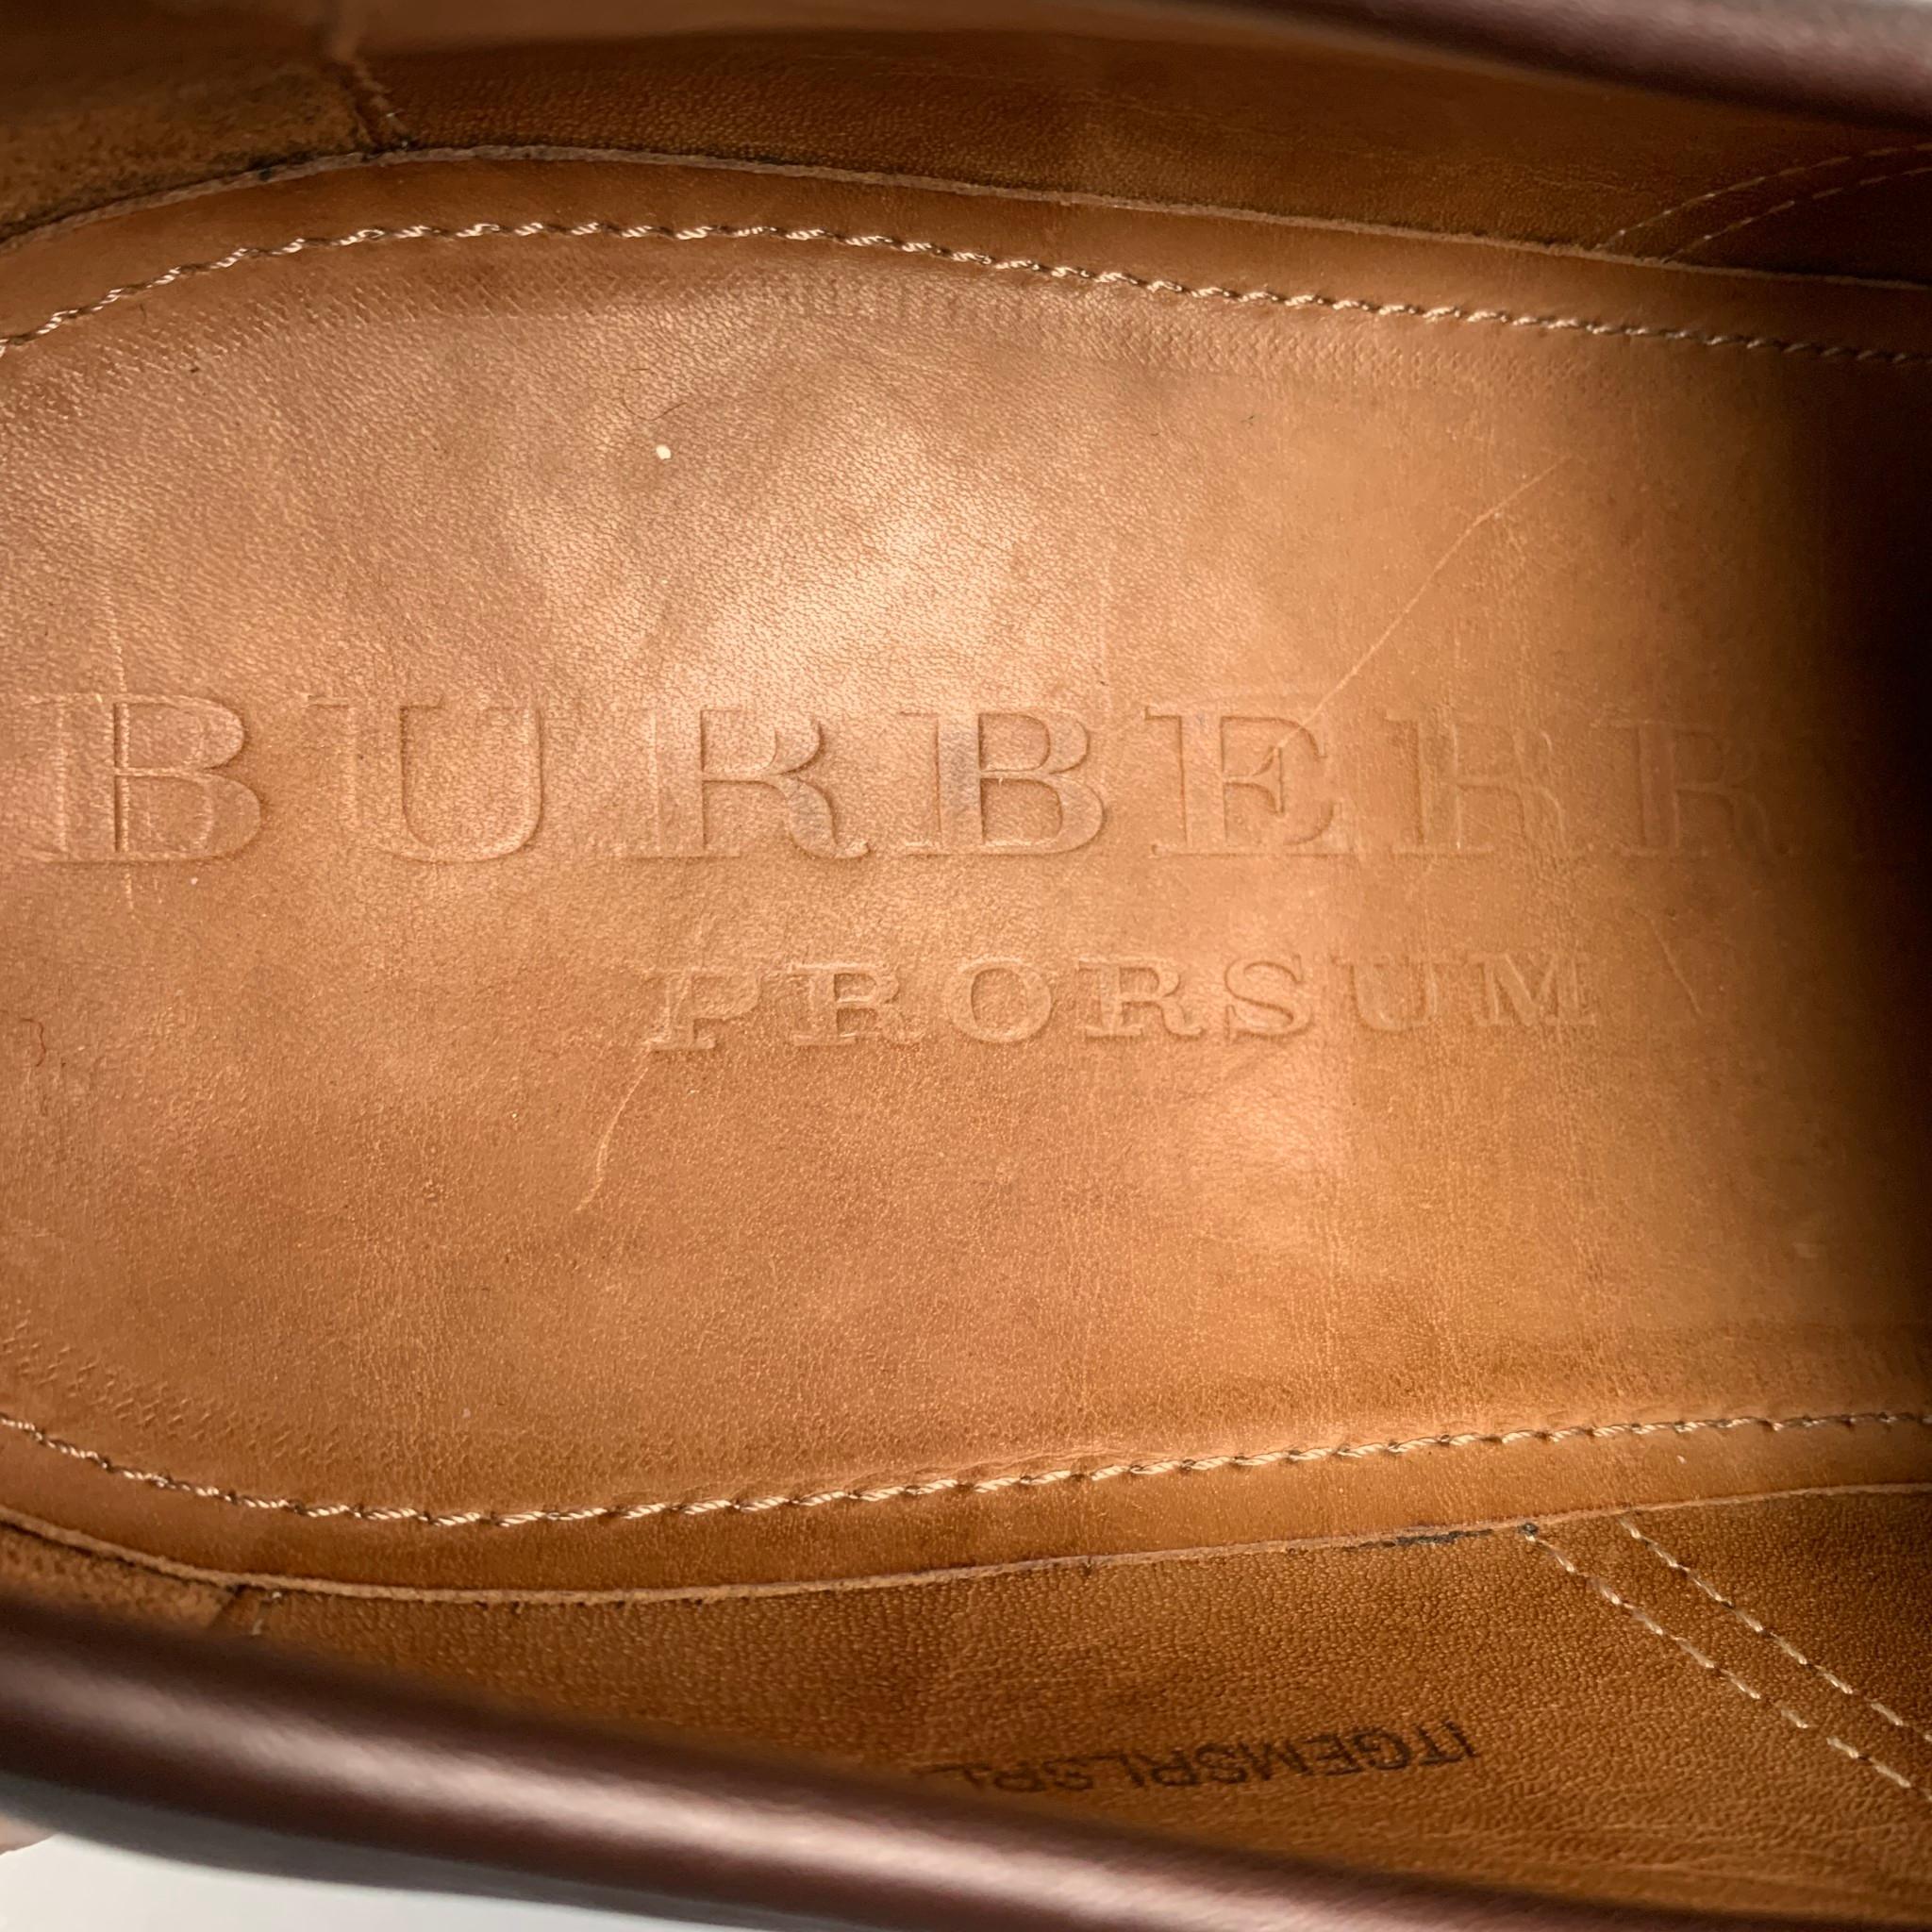 Men's BURBERRY PRORSUM Size 11 Brown Leather Tassel Cowall Loafers